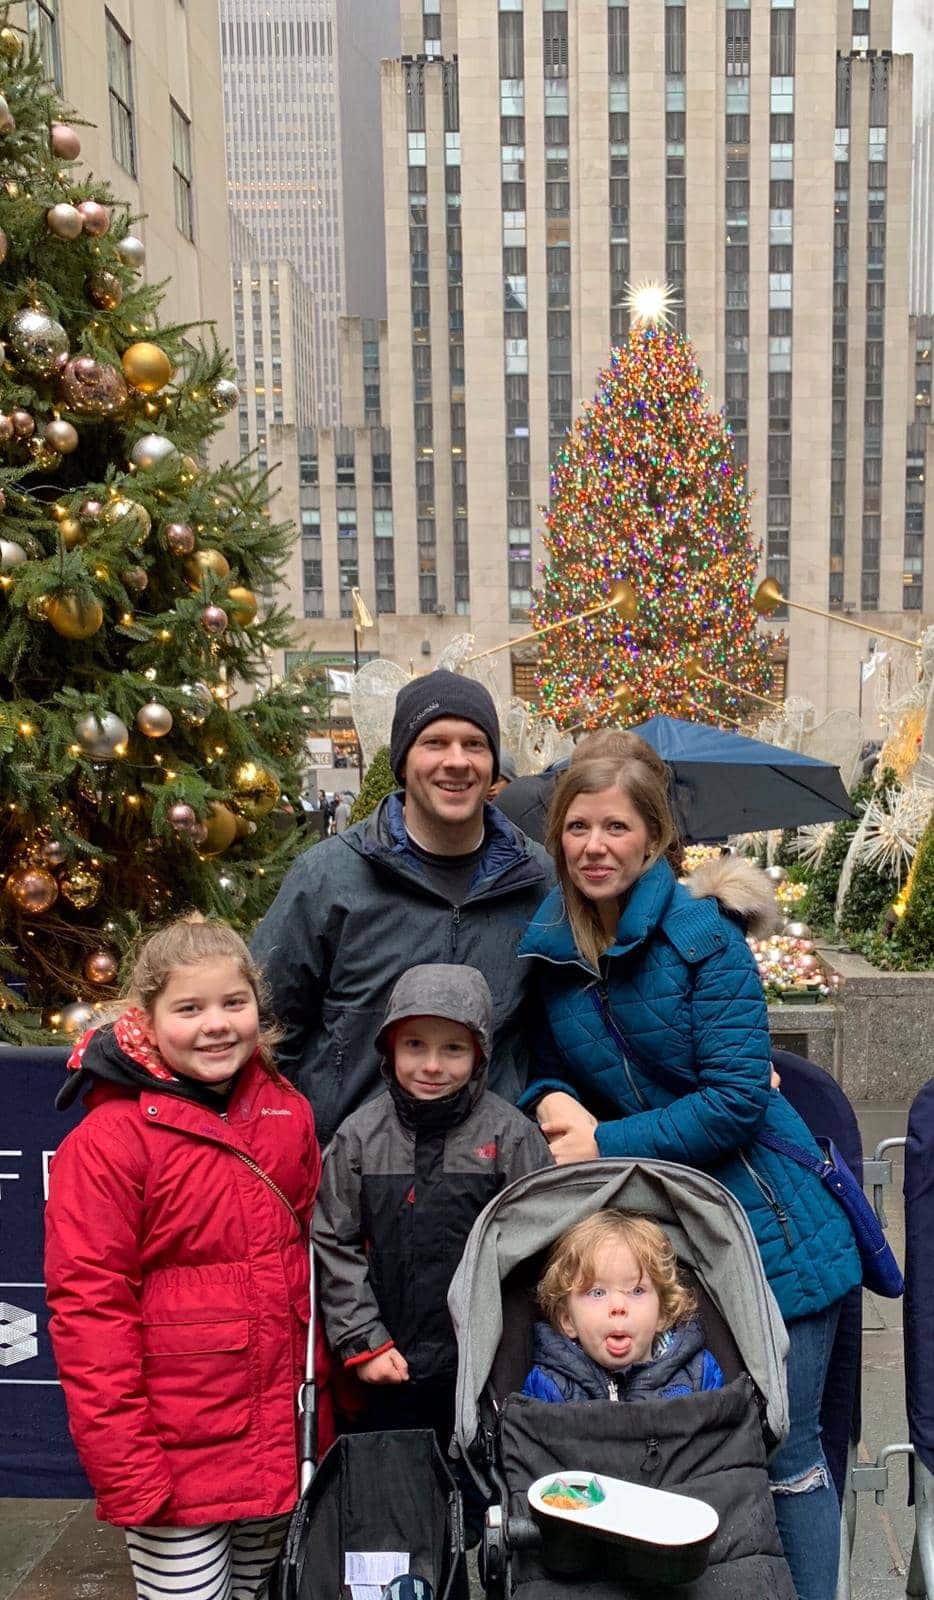 Brennan family in front of Christmas trees outside